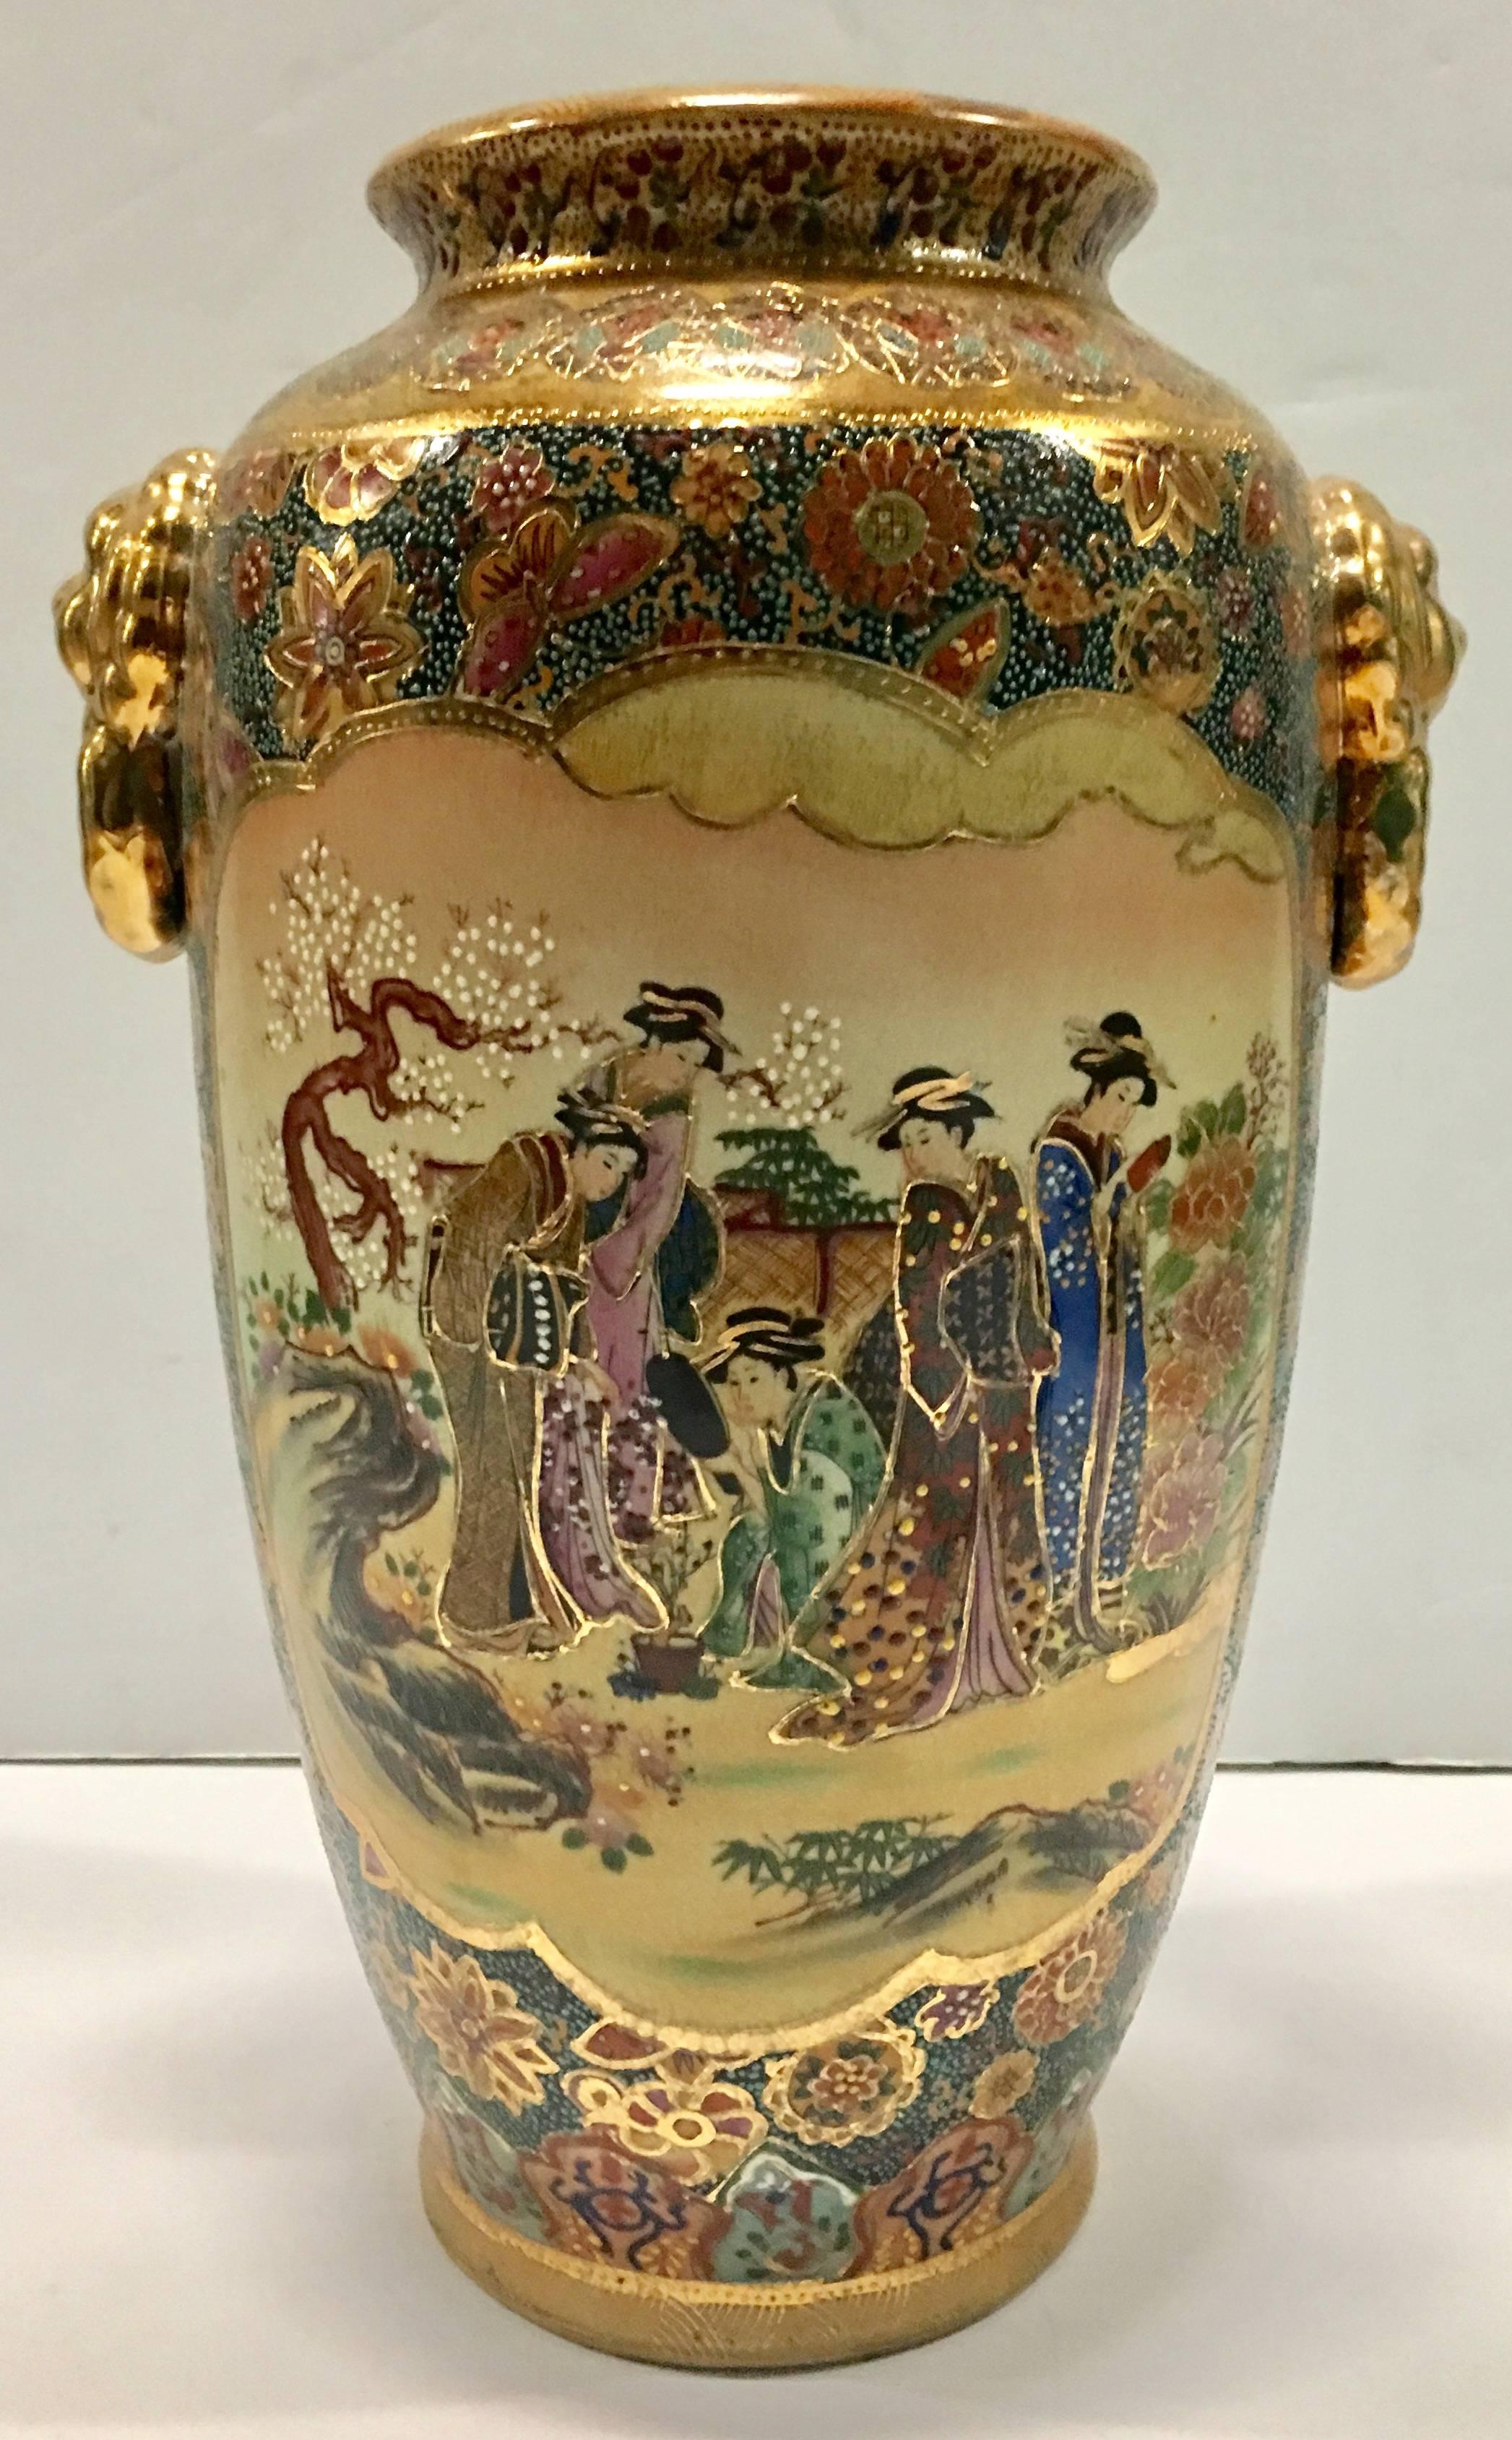 Japanese hand-painted Moriage and 22-karat gold detail Geisha two sided gold lion handle vase. Features women bonsai gardening scene on both sides, with heavy raised moriage and gold detail.